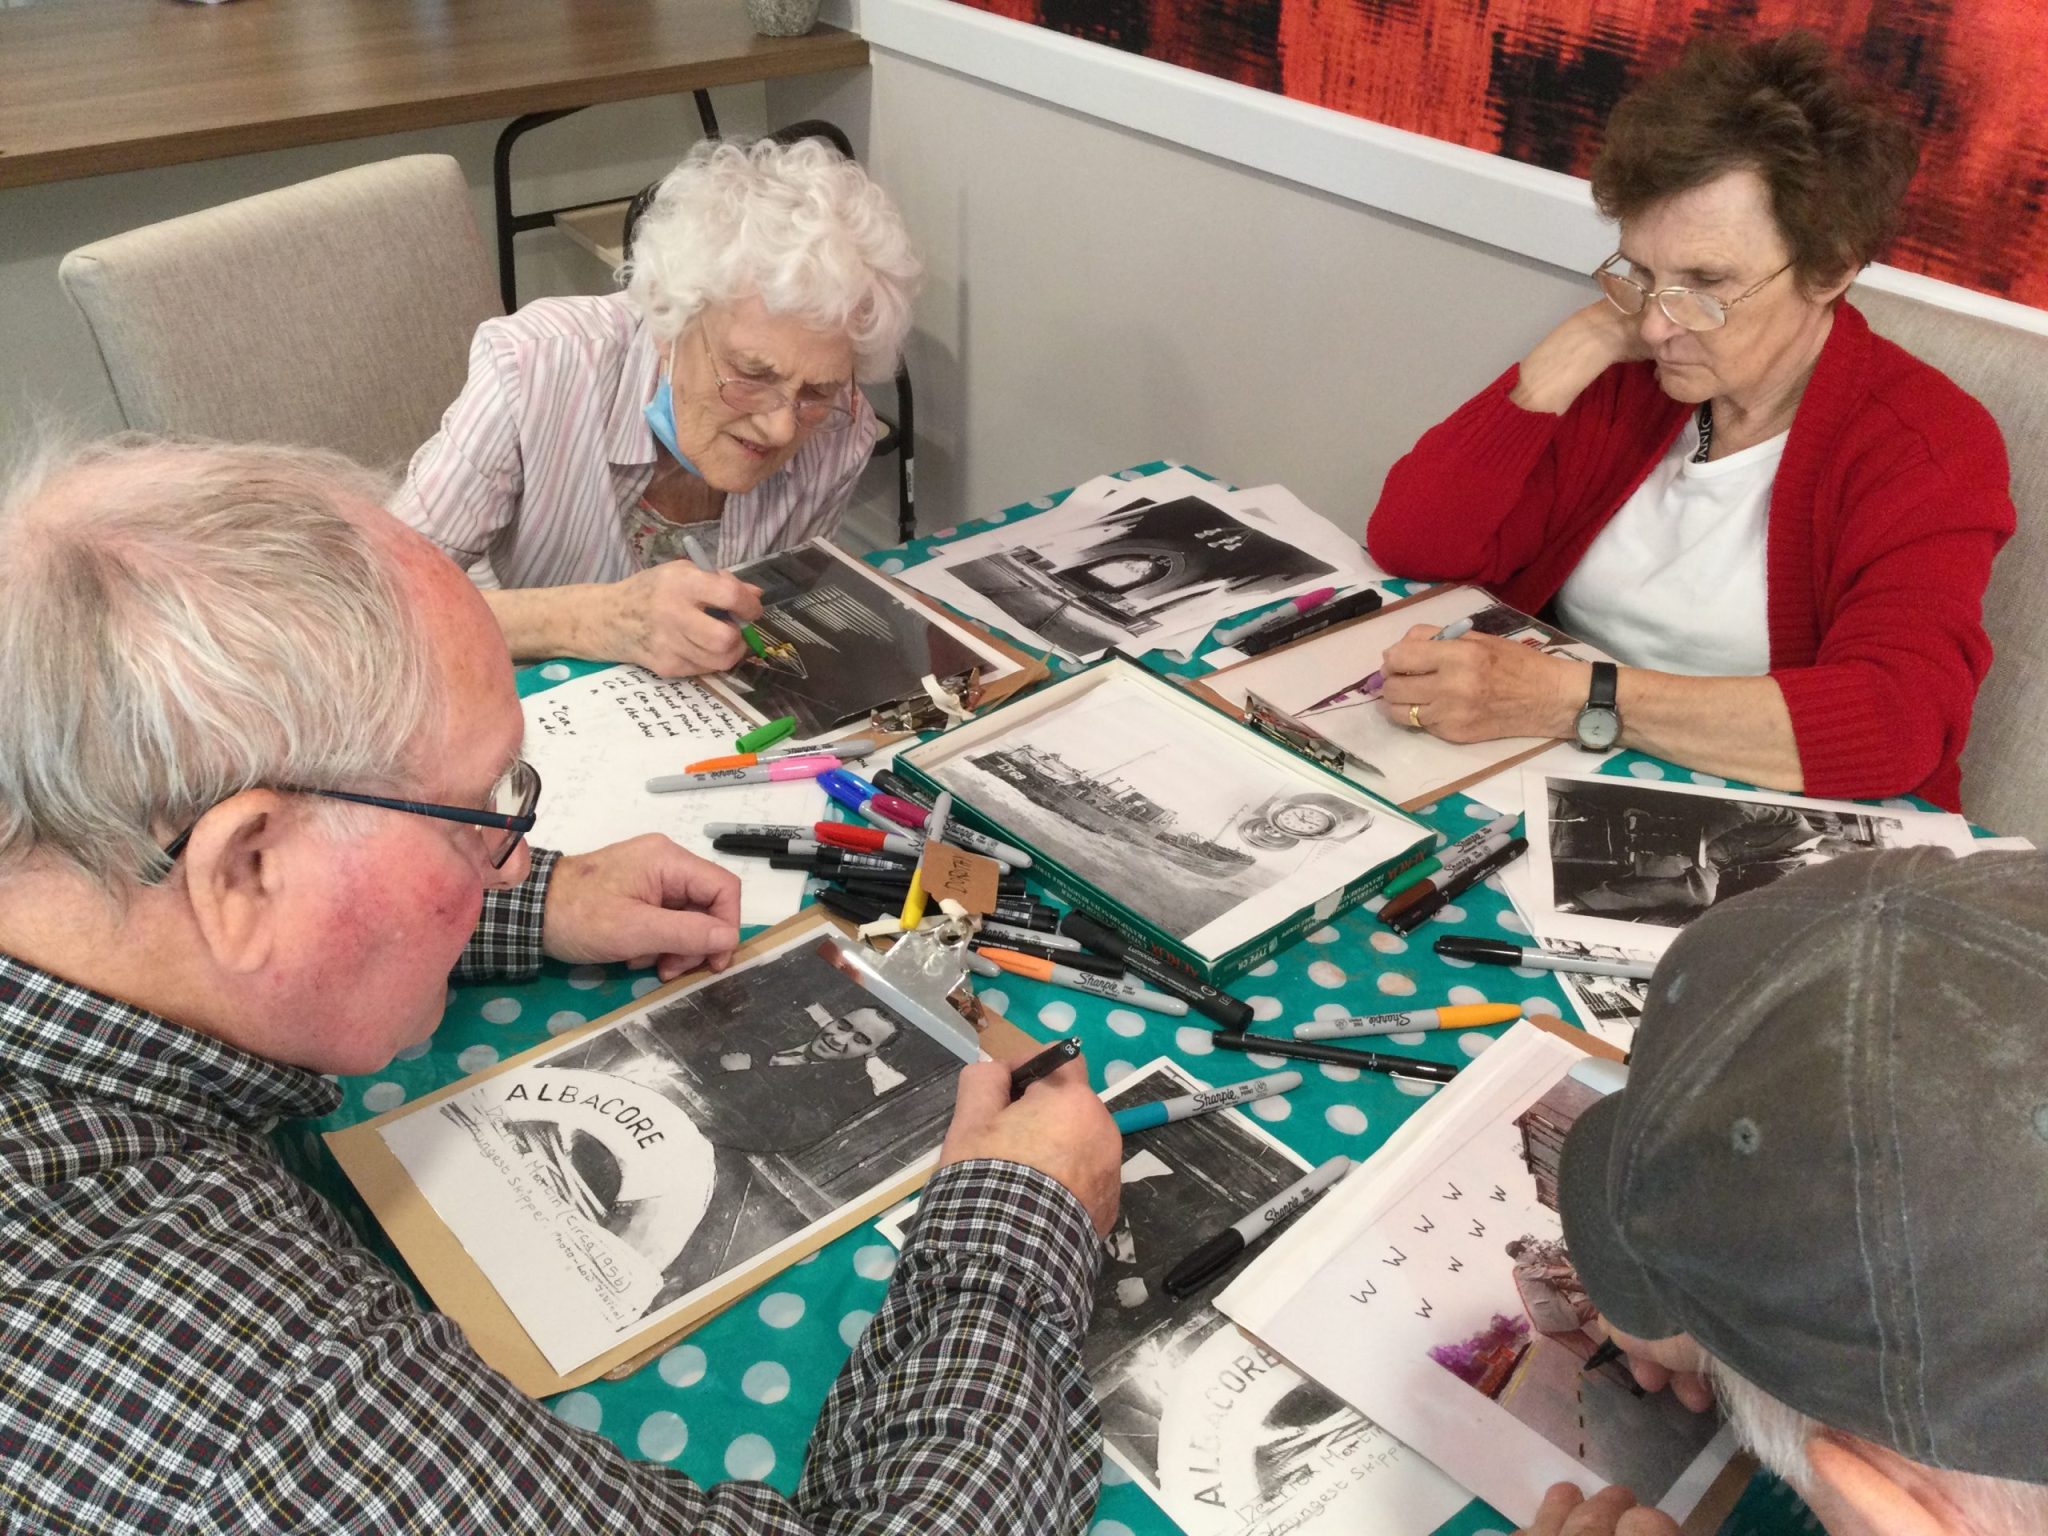 A group of four adults studying photographs and creating illustrations